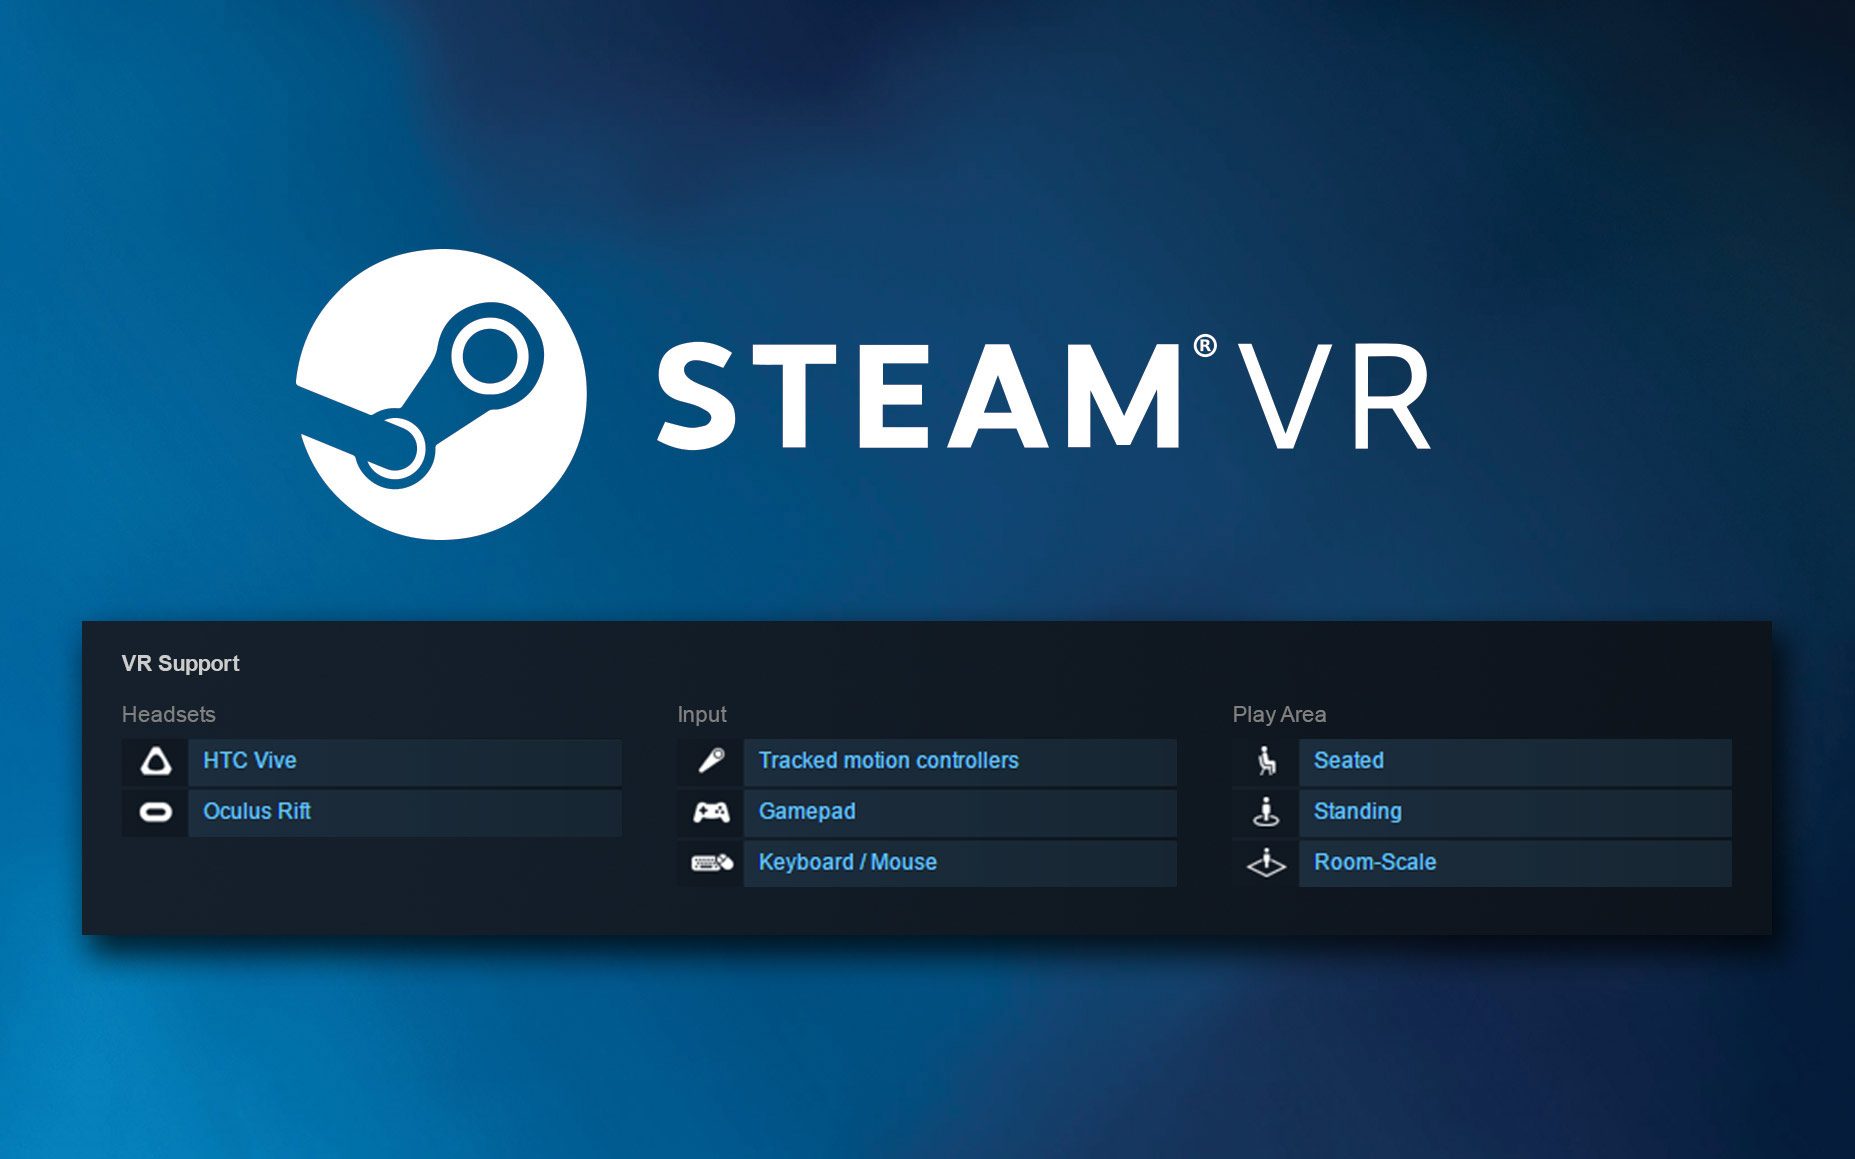 How Use the Oculus With SteamVR in 4 Steps